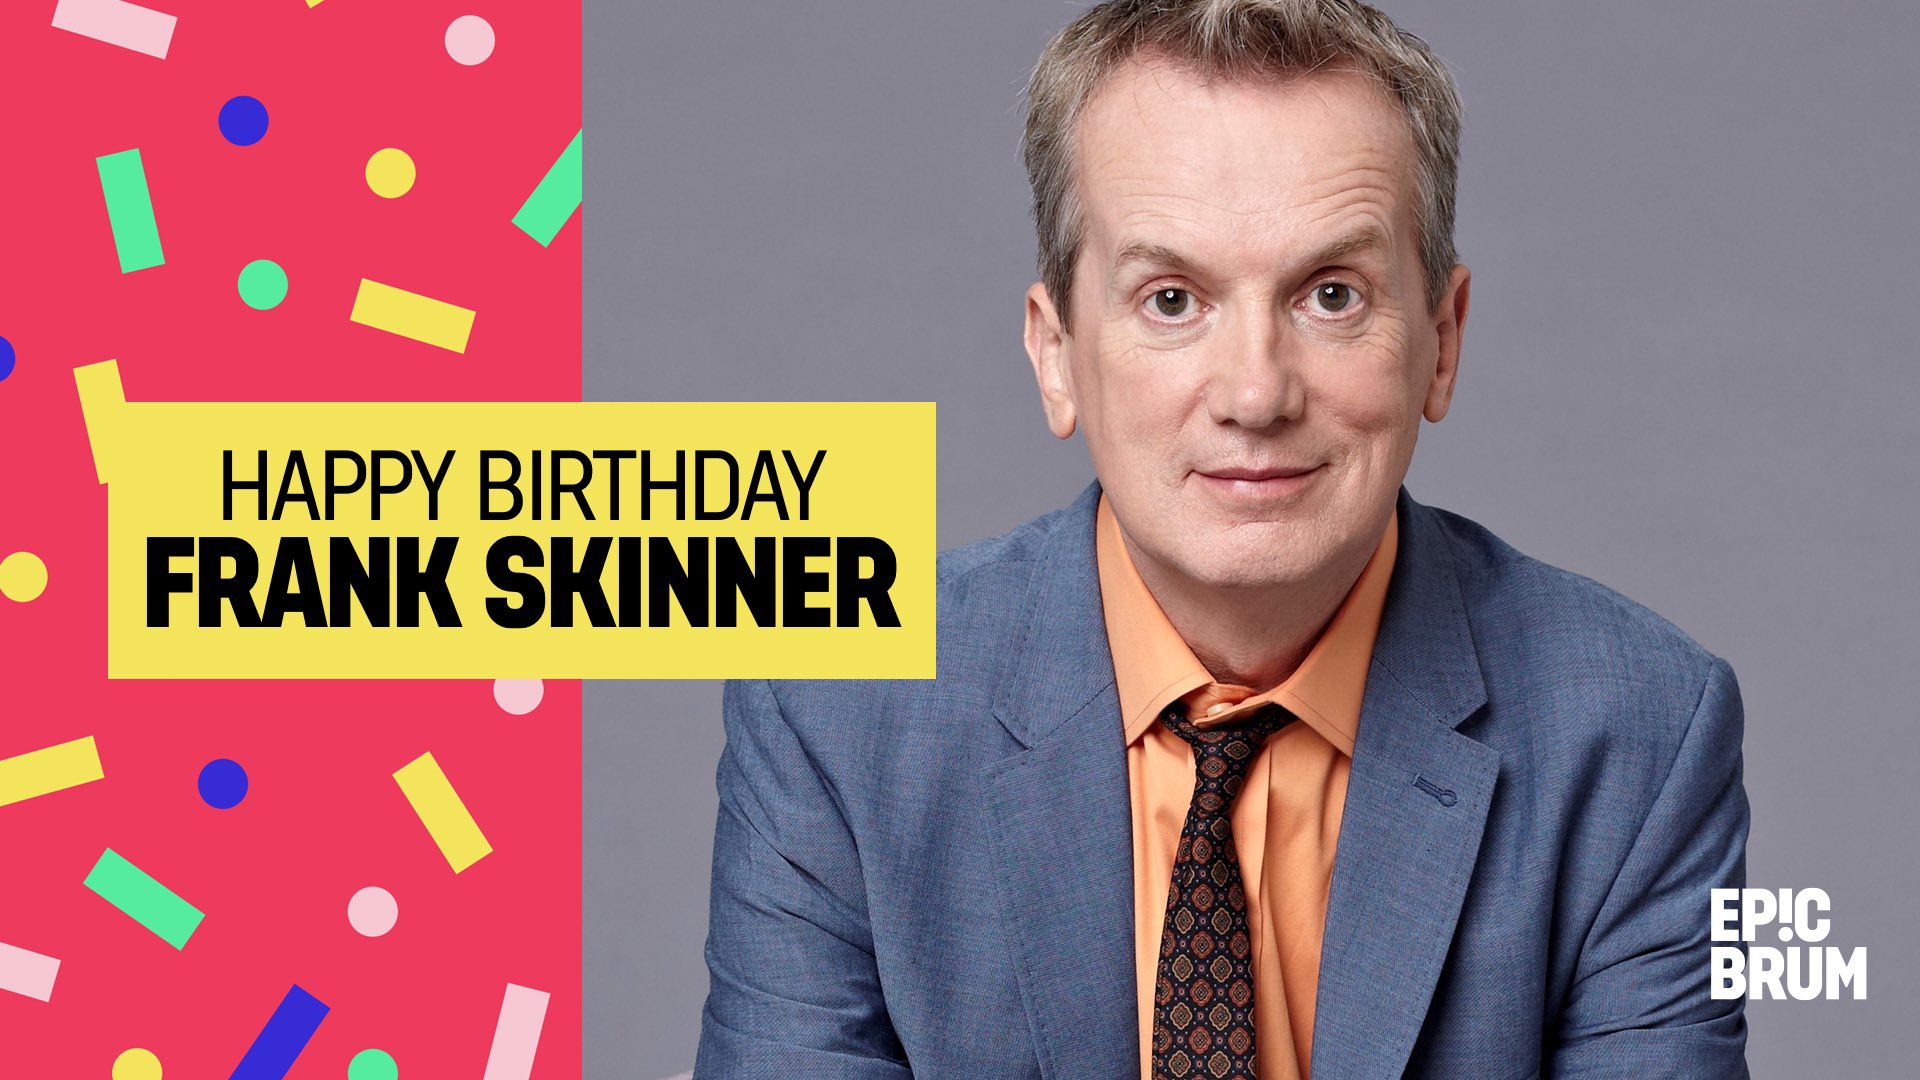  EP!C BIRTHDAY Wishing the one and only Funtime Frankie, Frank Skinner, a very happy birthday today! 